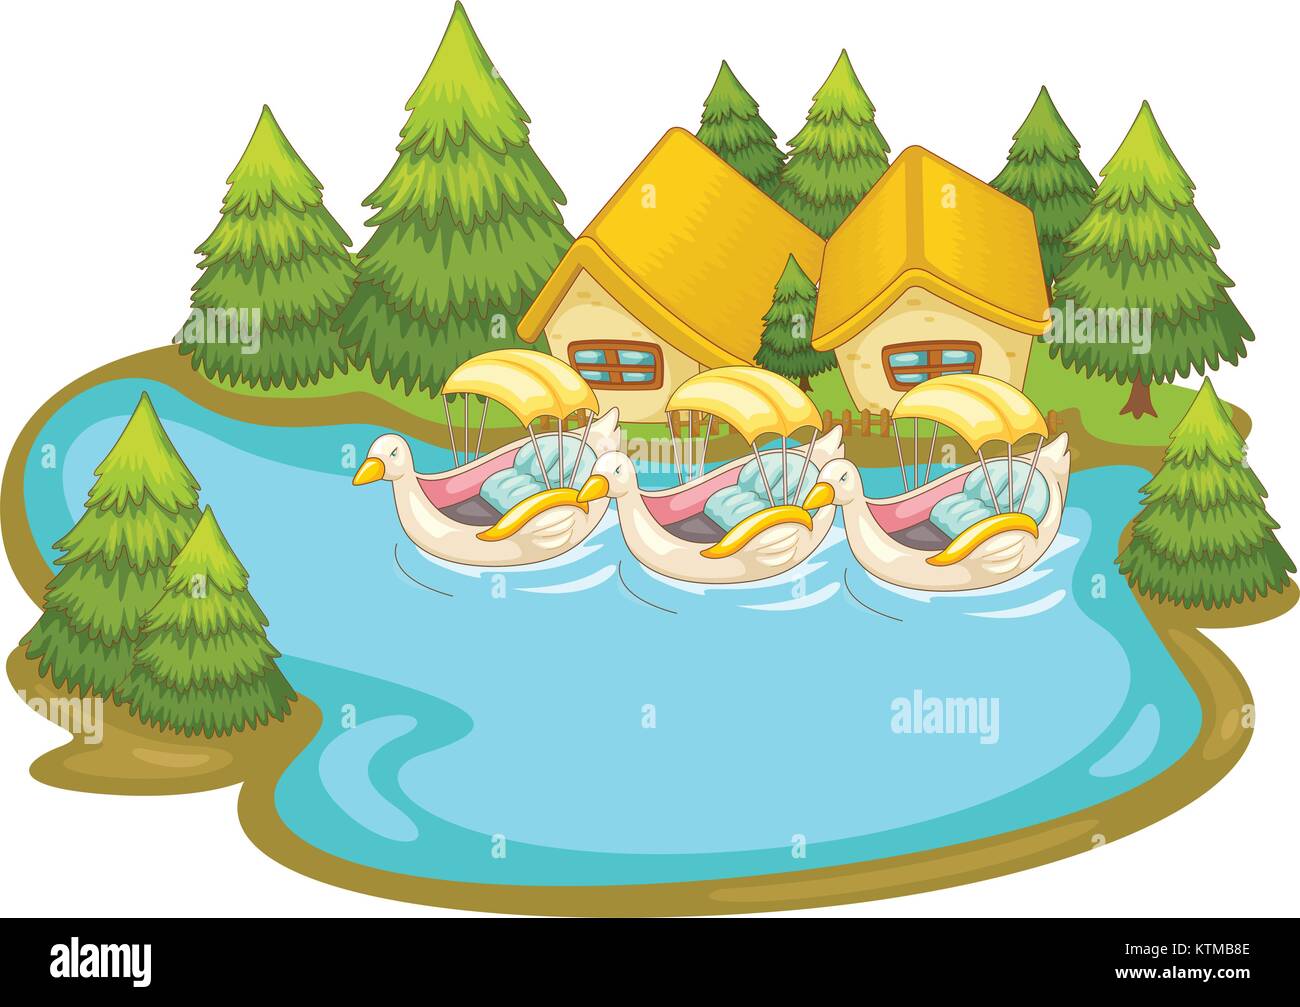 Illustraton of boats by holiday cabins Stock Vector